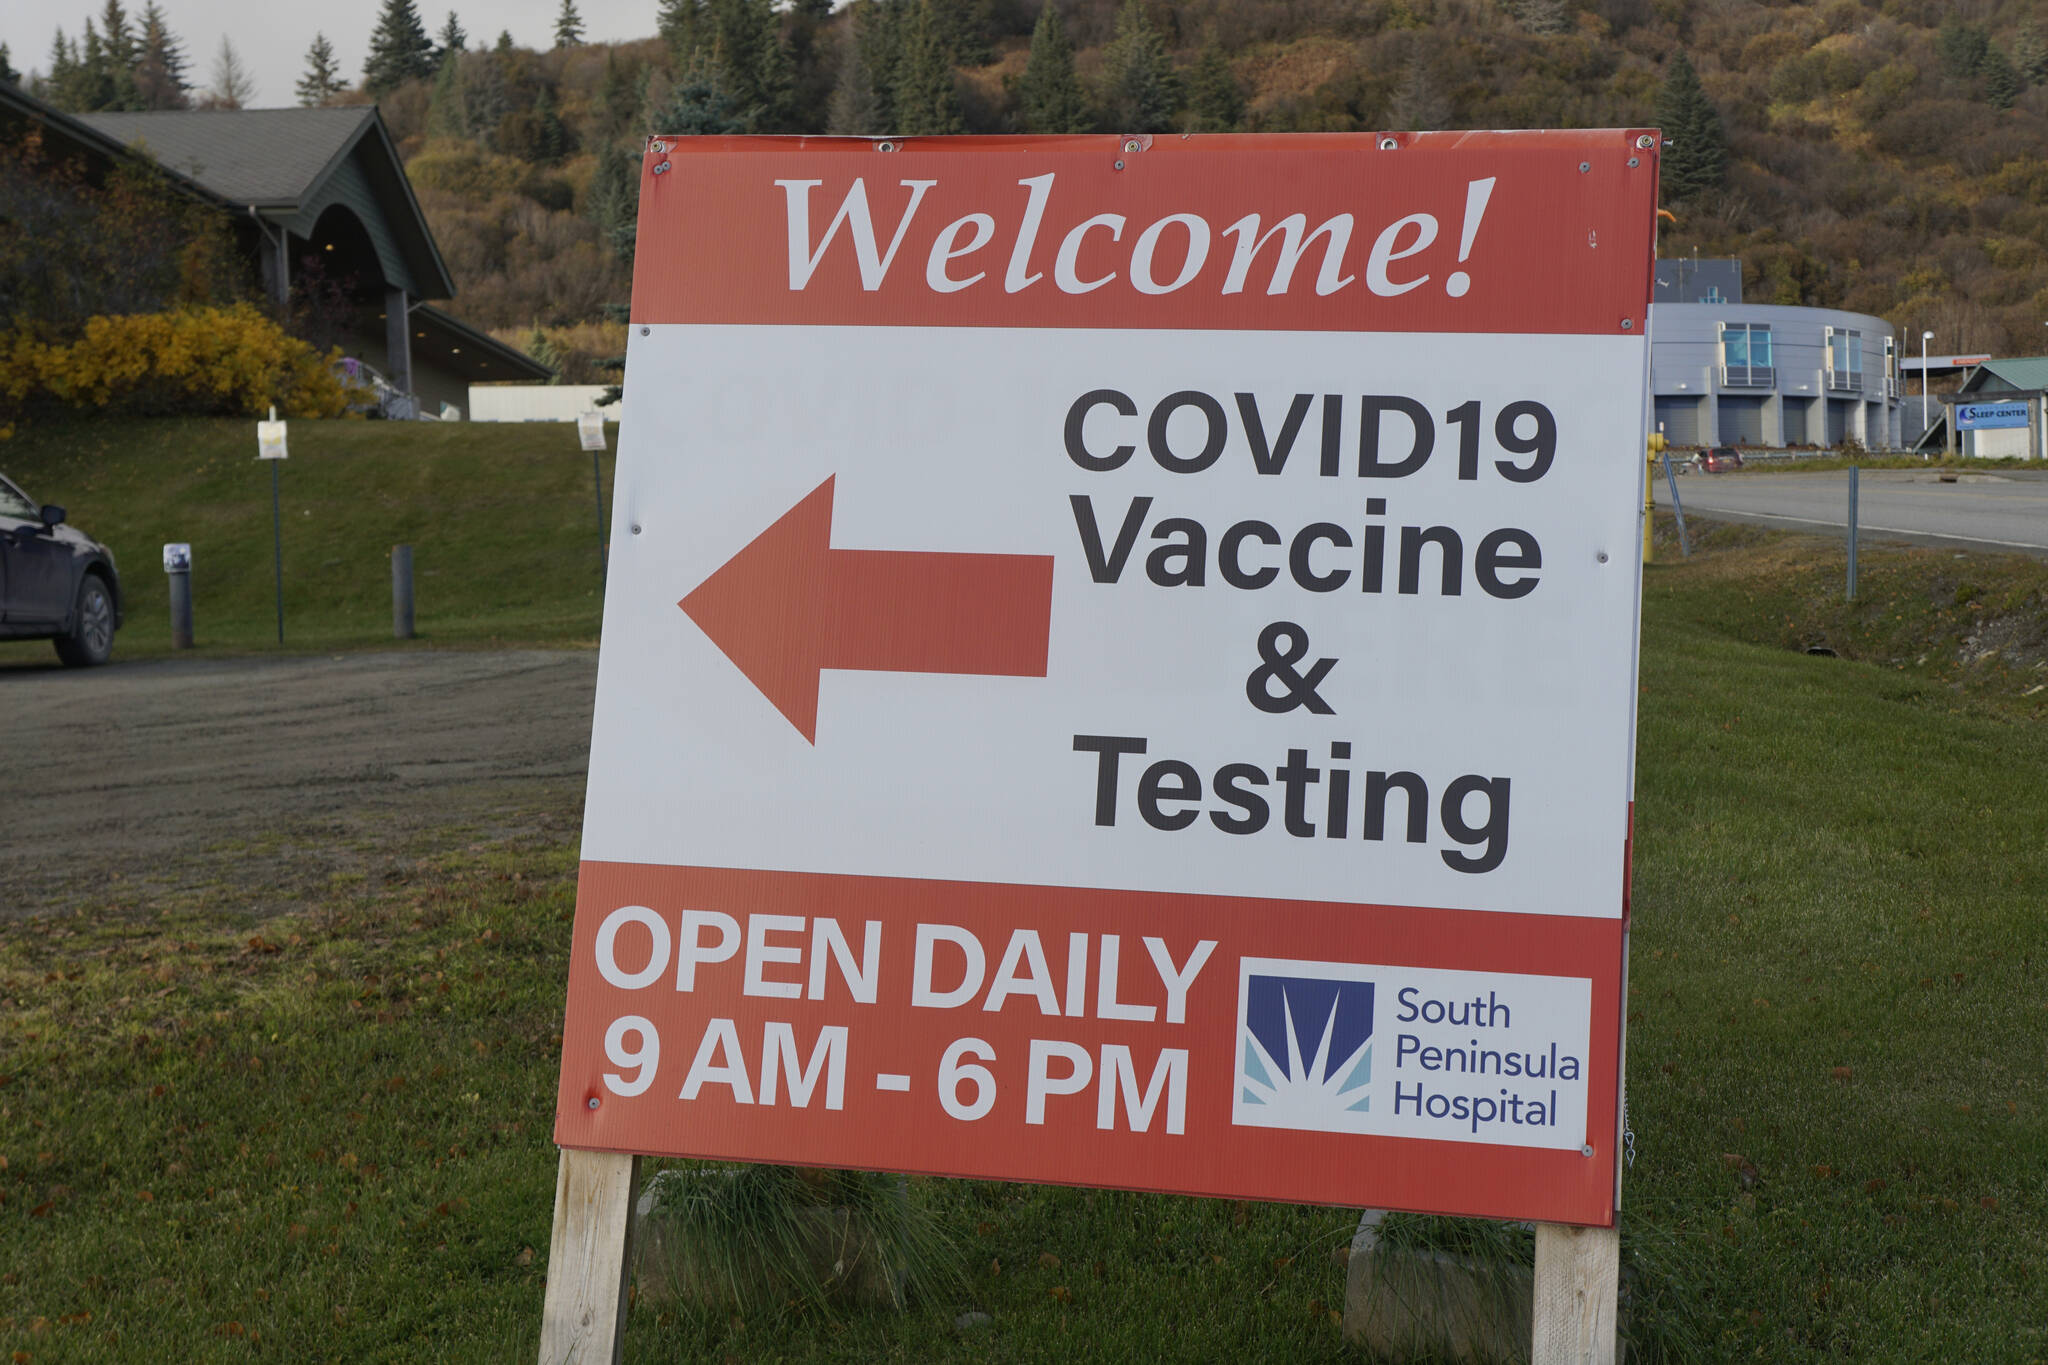 A sign points to the South Peninsula Hospital COVID-19 testing and vaccination clinic on Bartlett Street on Monday, Oct. 24, 2021, in Homer, Alaska. (Photo by Michael Armstrong/Homer News)